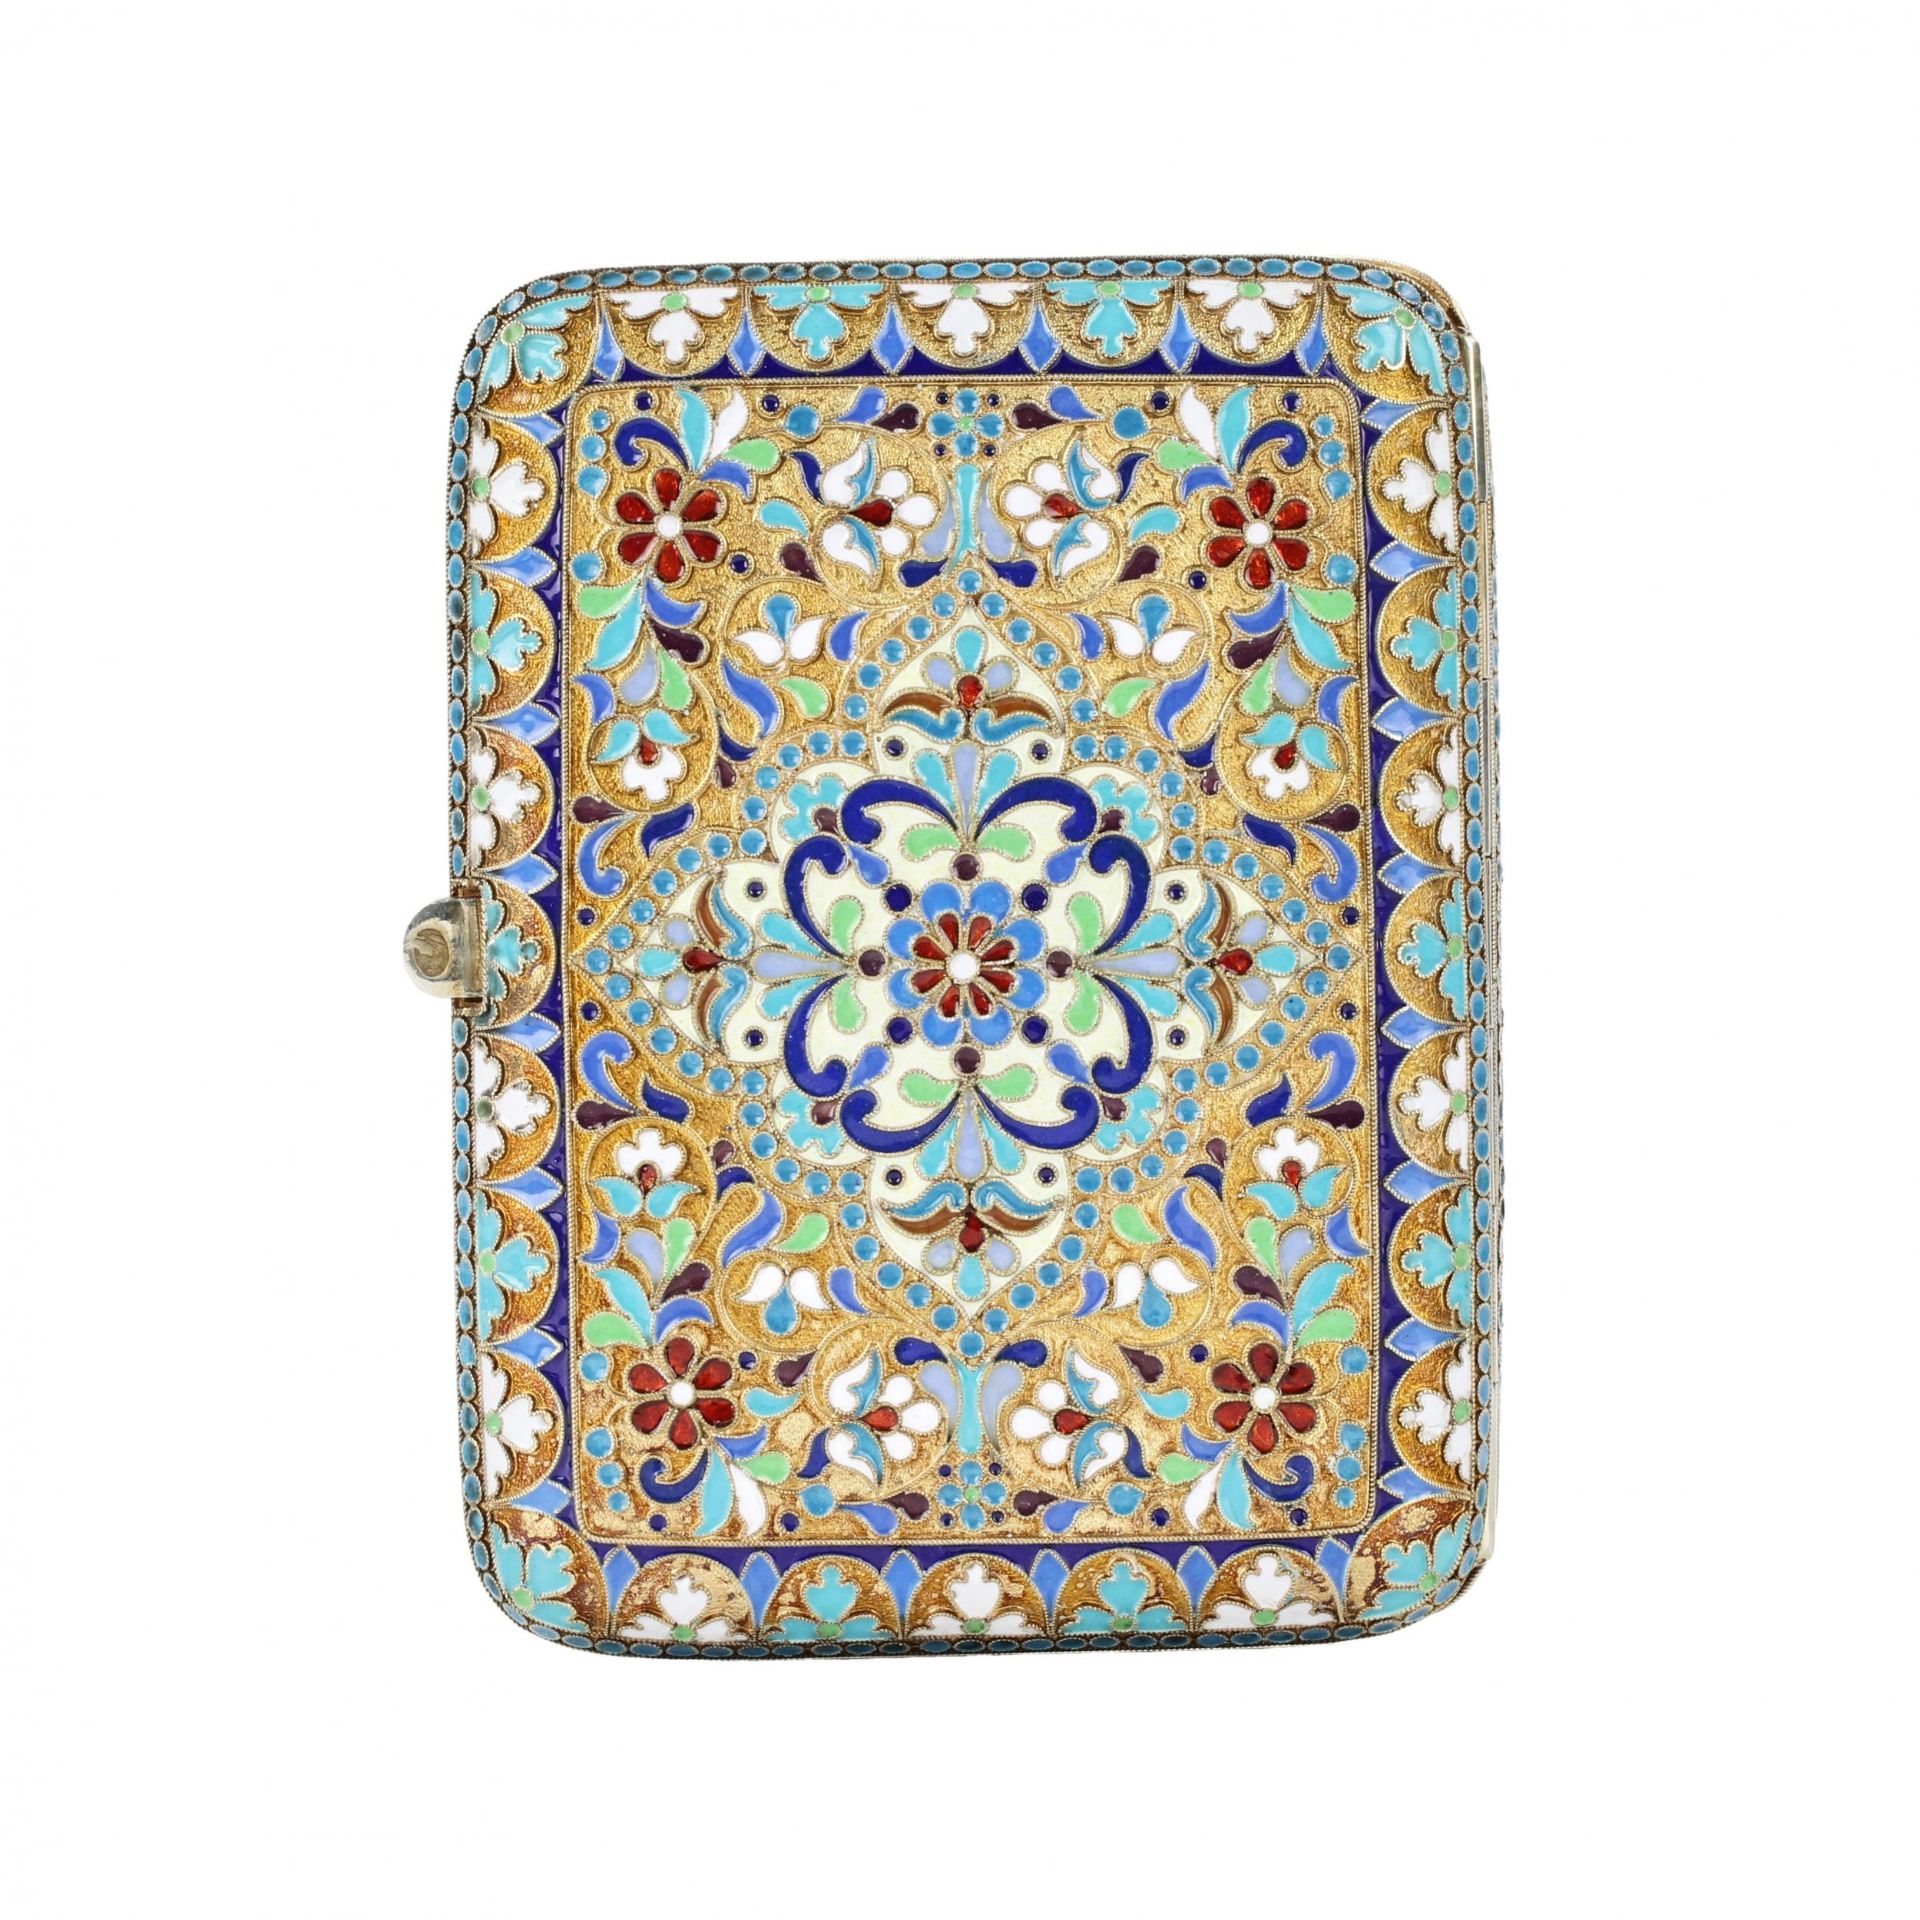 Silver cigarette case with gilding and cloisonne enamels. - Image 5 of 12